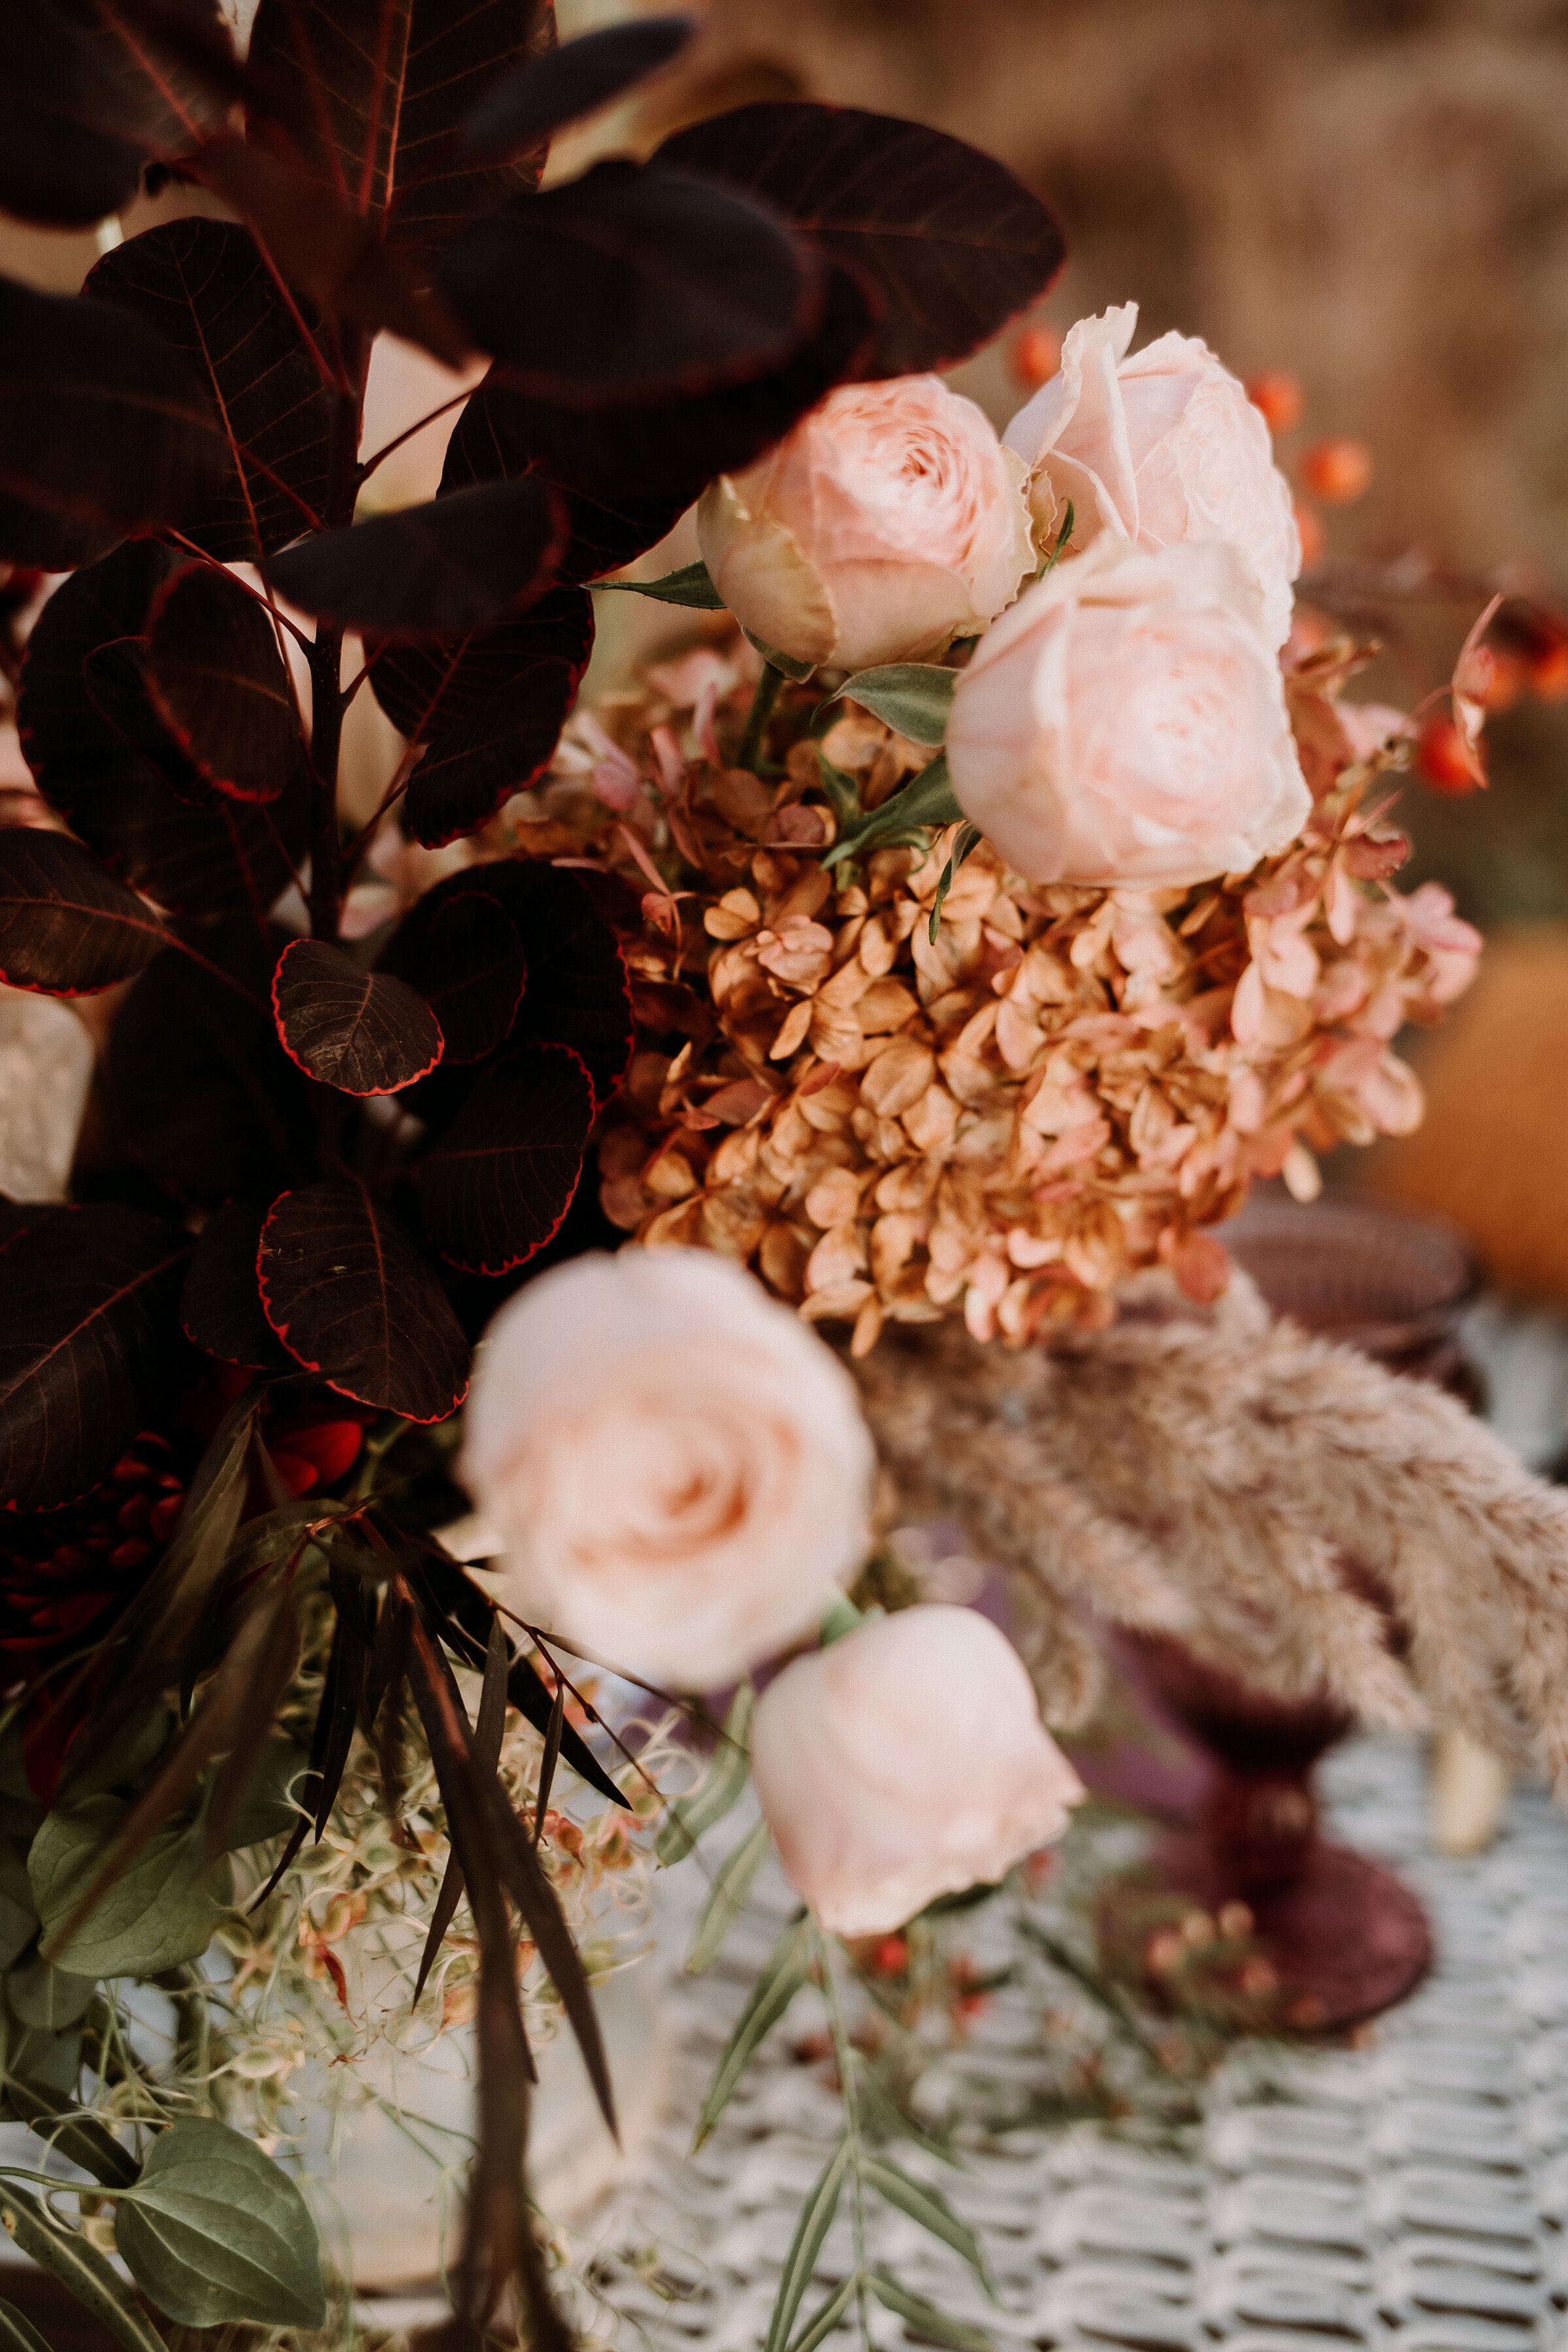  Moody handpicked bohemian florals on display at an elopement style wedding shoot in Indiana Dunes State Park.&nbsp; moody boho wedding décor wedding floral arrangements Lake Michigan wedding inspo beach styled wedding shoot Chesterton Indiana photog